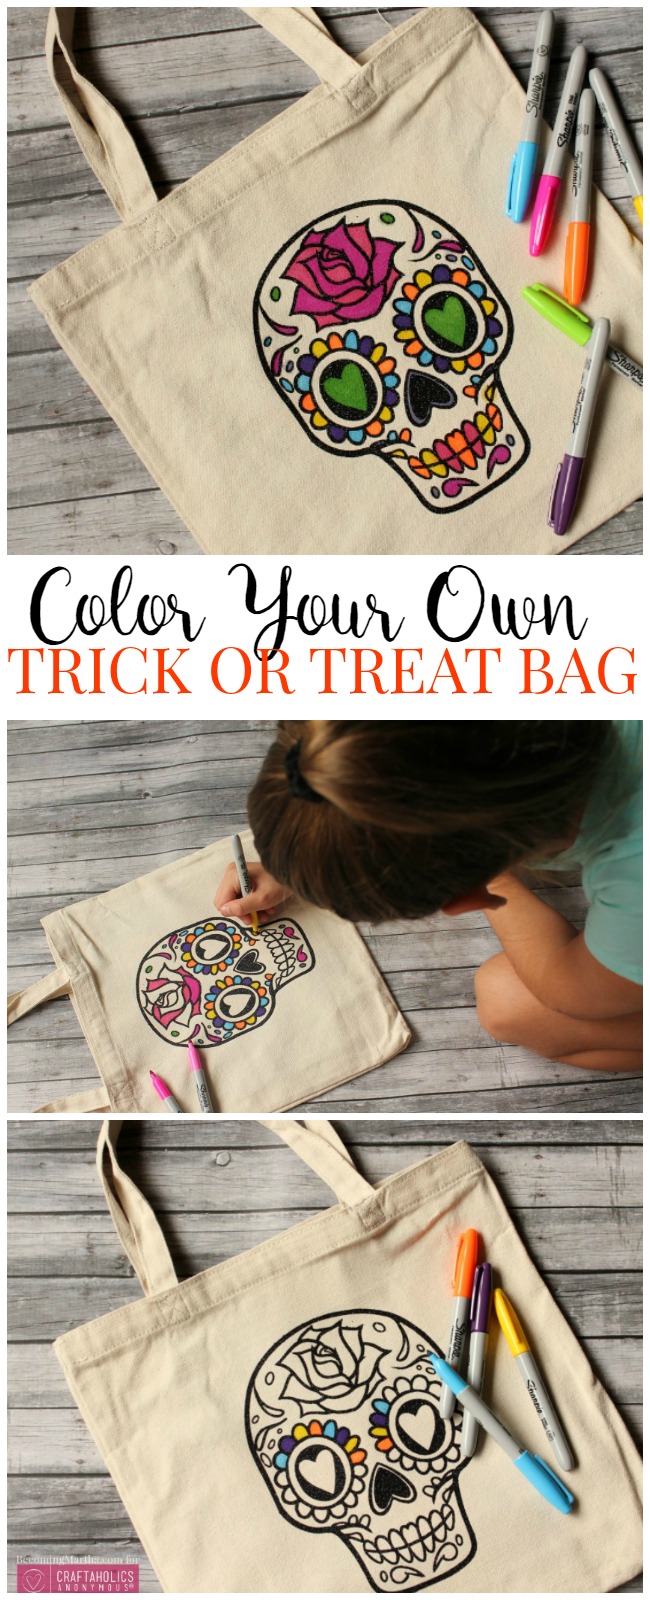 How to make your own customized Color Your Own Trick or Treat Bag for candy this year! 